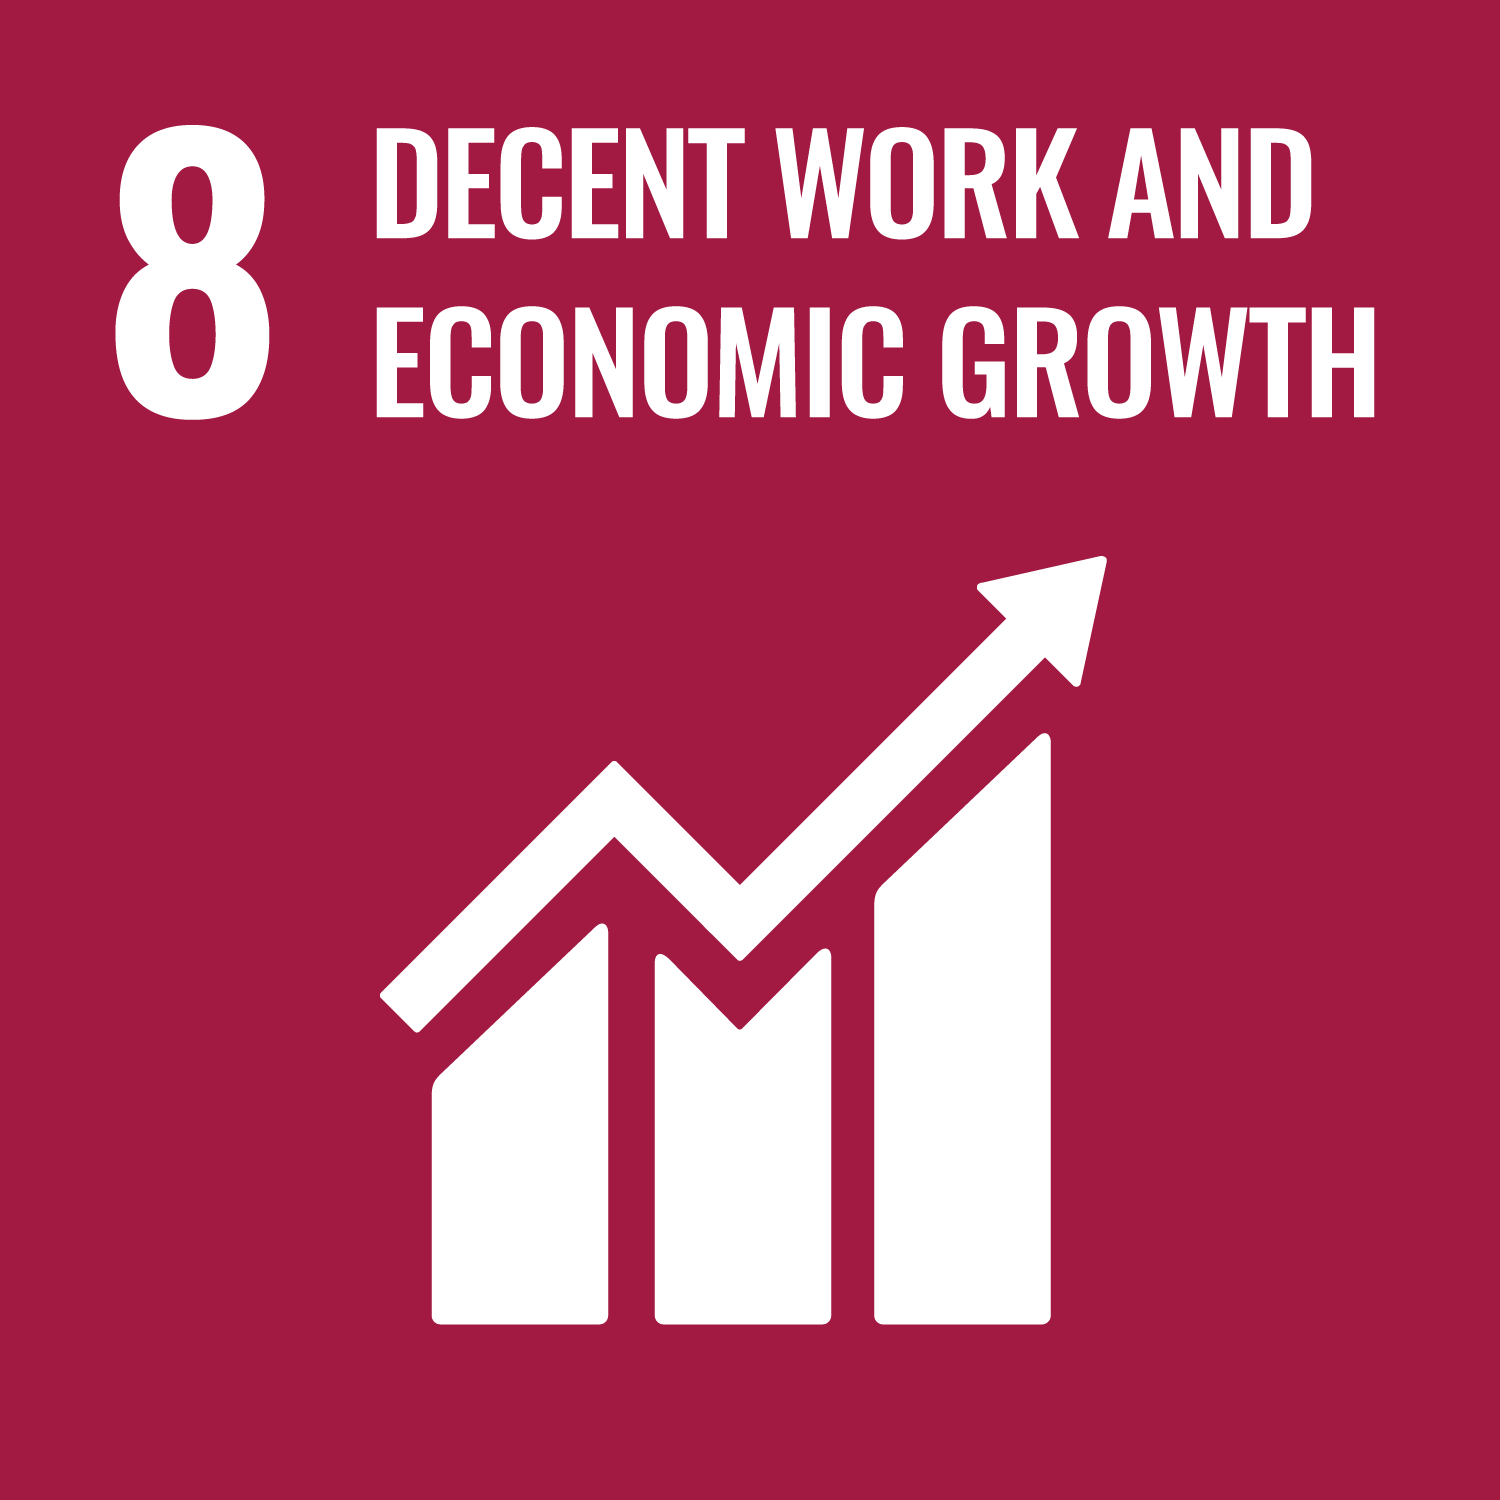 Sustainable Development Goal 8 – Decent Work and Economic Growth